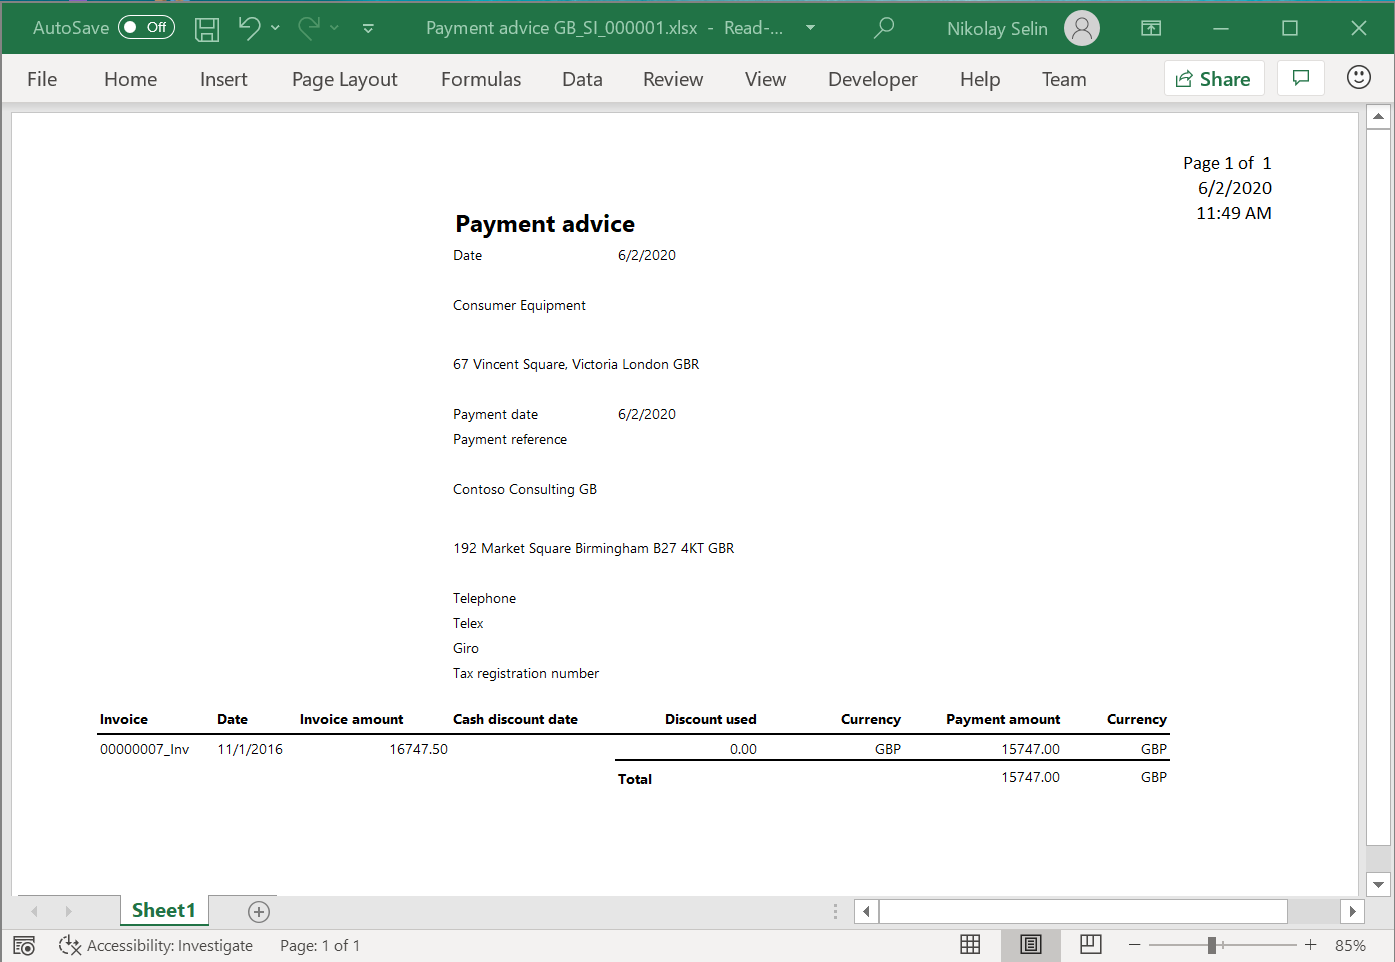 Payment advice report in Excel format.